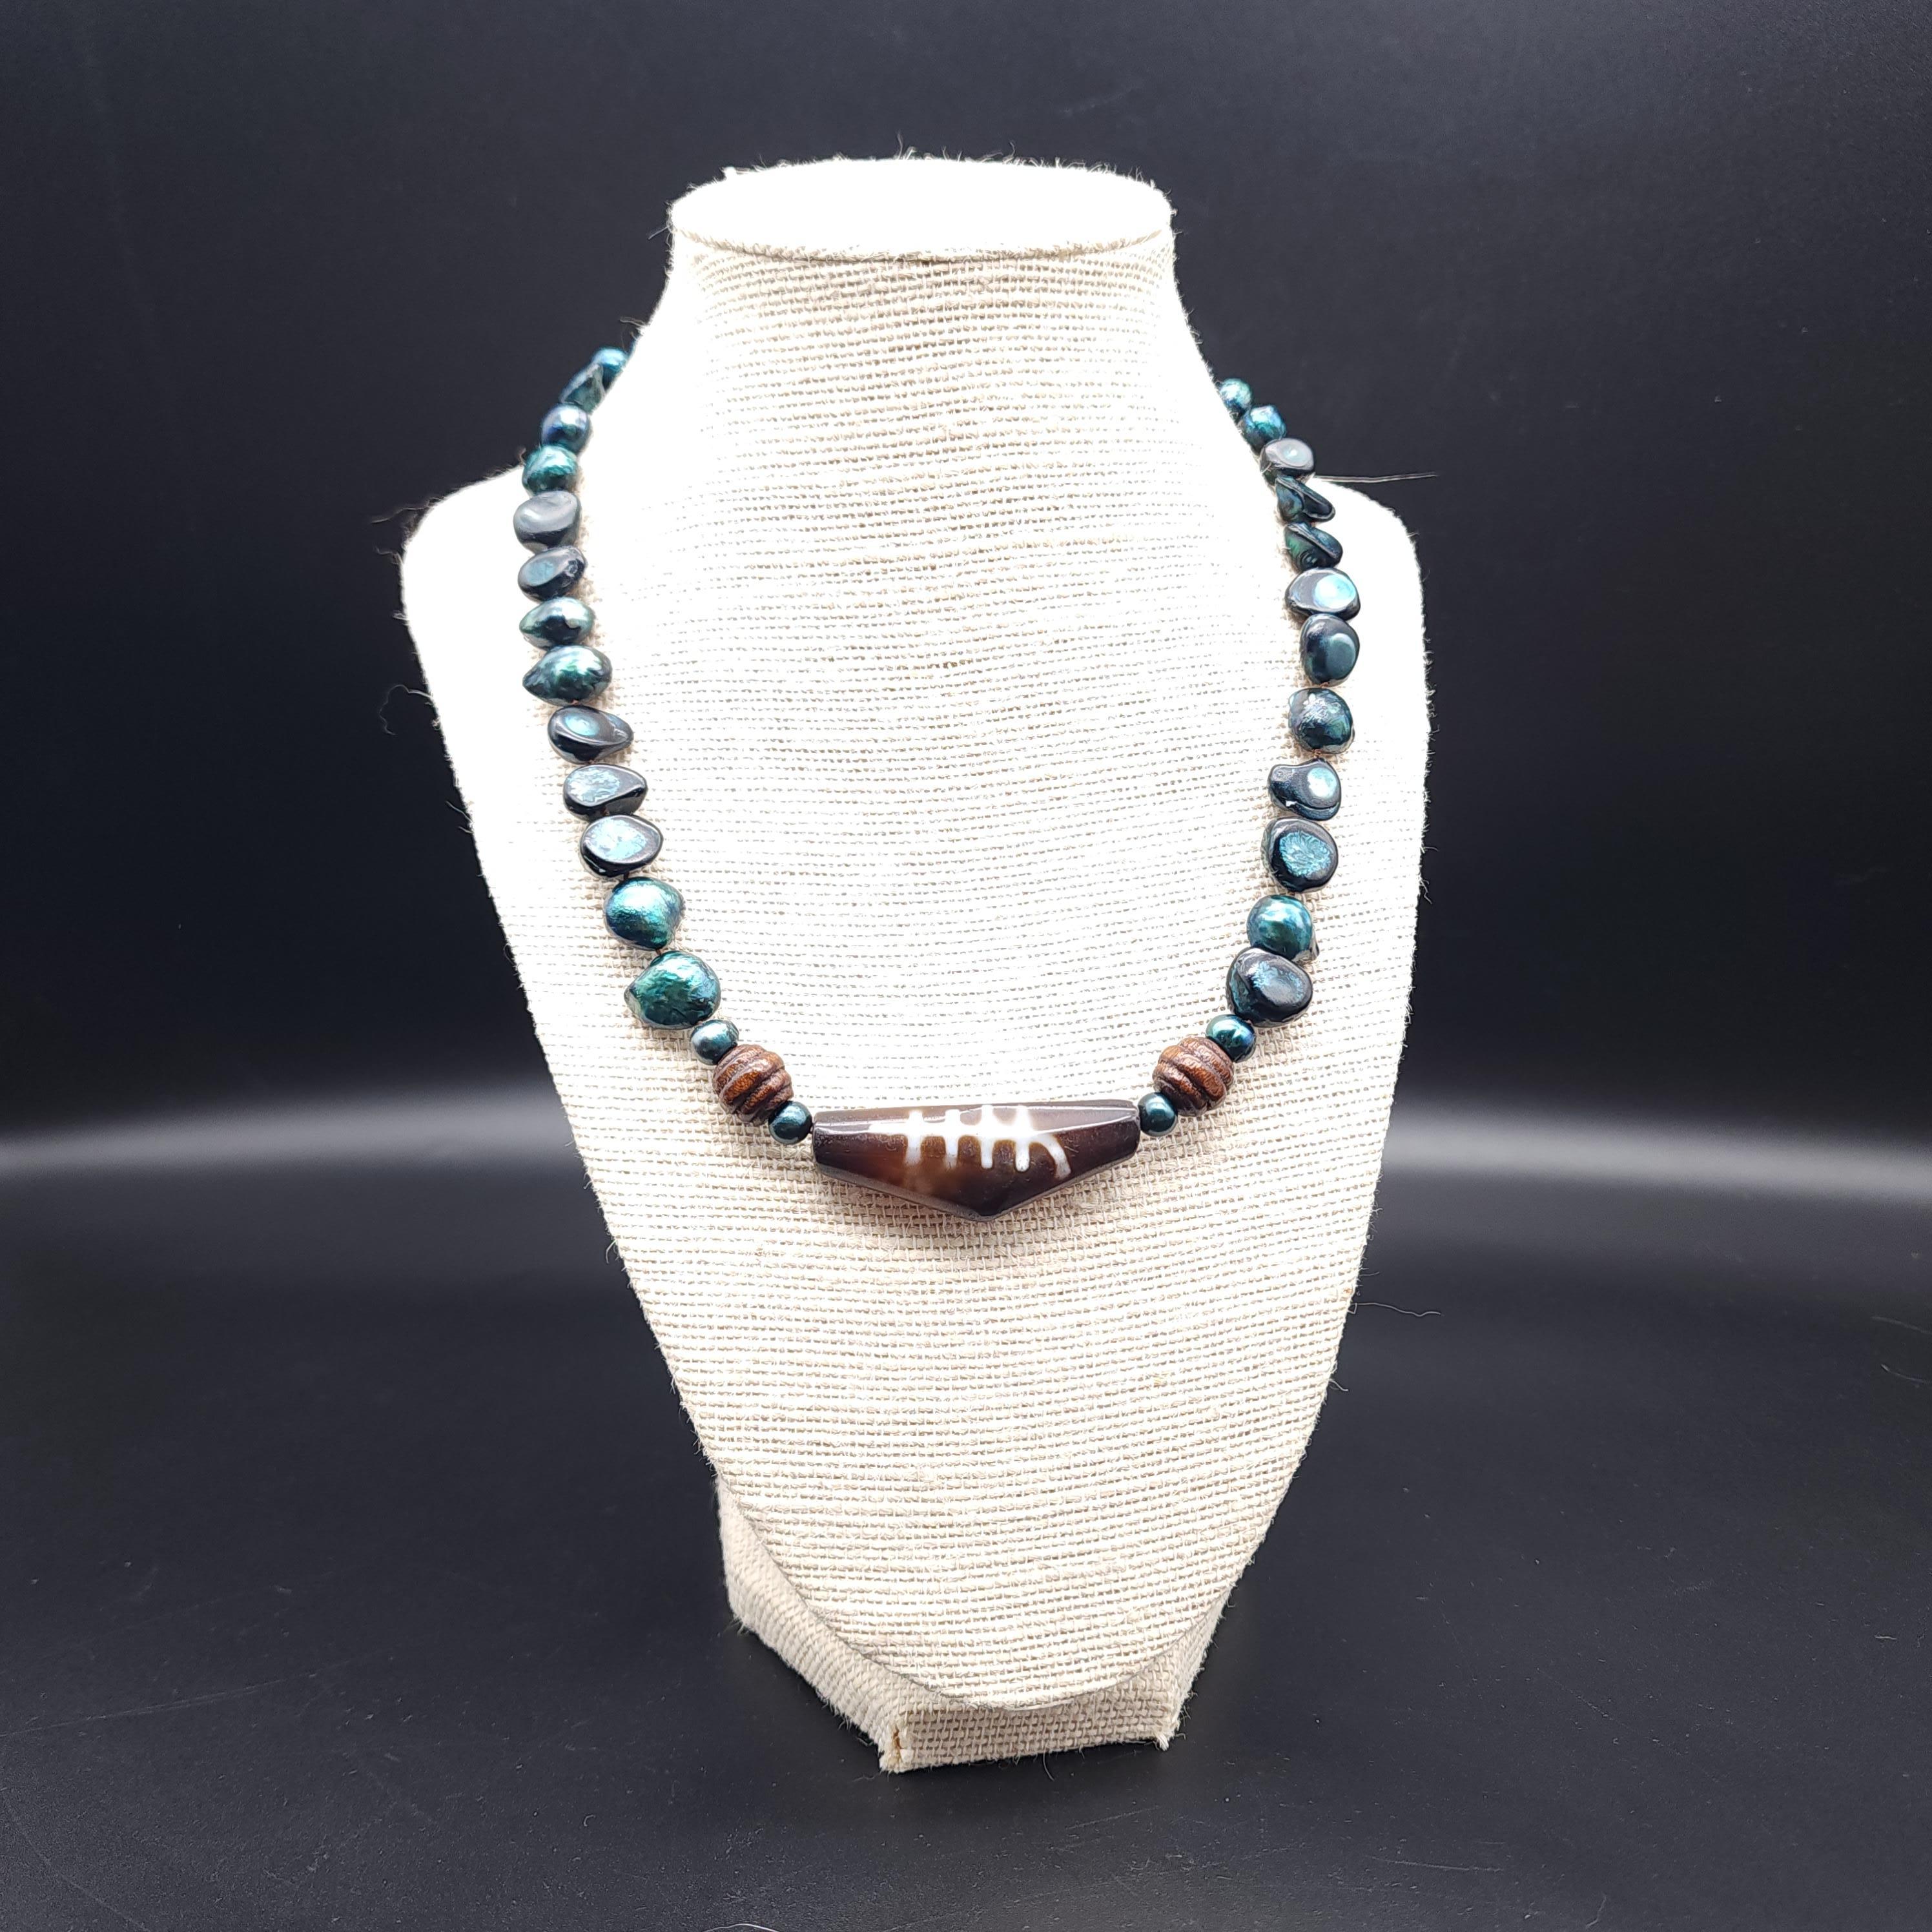 Necklace length: 45 cm / 17 3/4 in
Beads vary, average size 1cm
Dzi pendant: 4.4 cm / 1.75 in wide
Marks / Hallmarks: 925 on clasp

Elevate your style with our exquisite vintage freshwater pearl bead necklace, featuring captivating blue and green